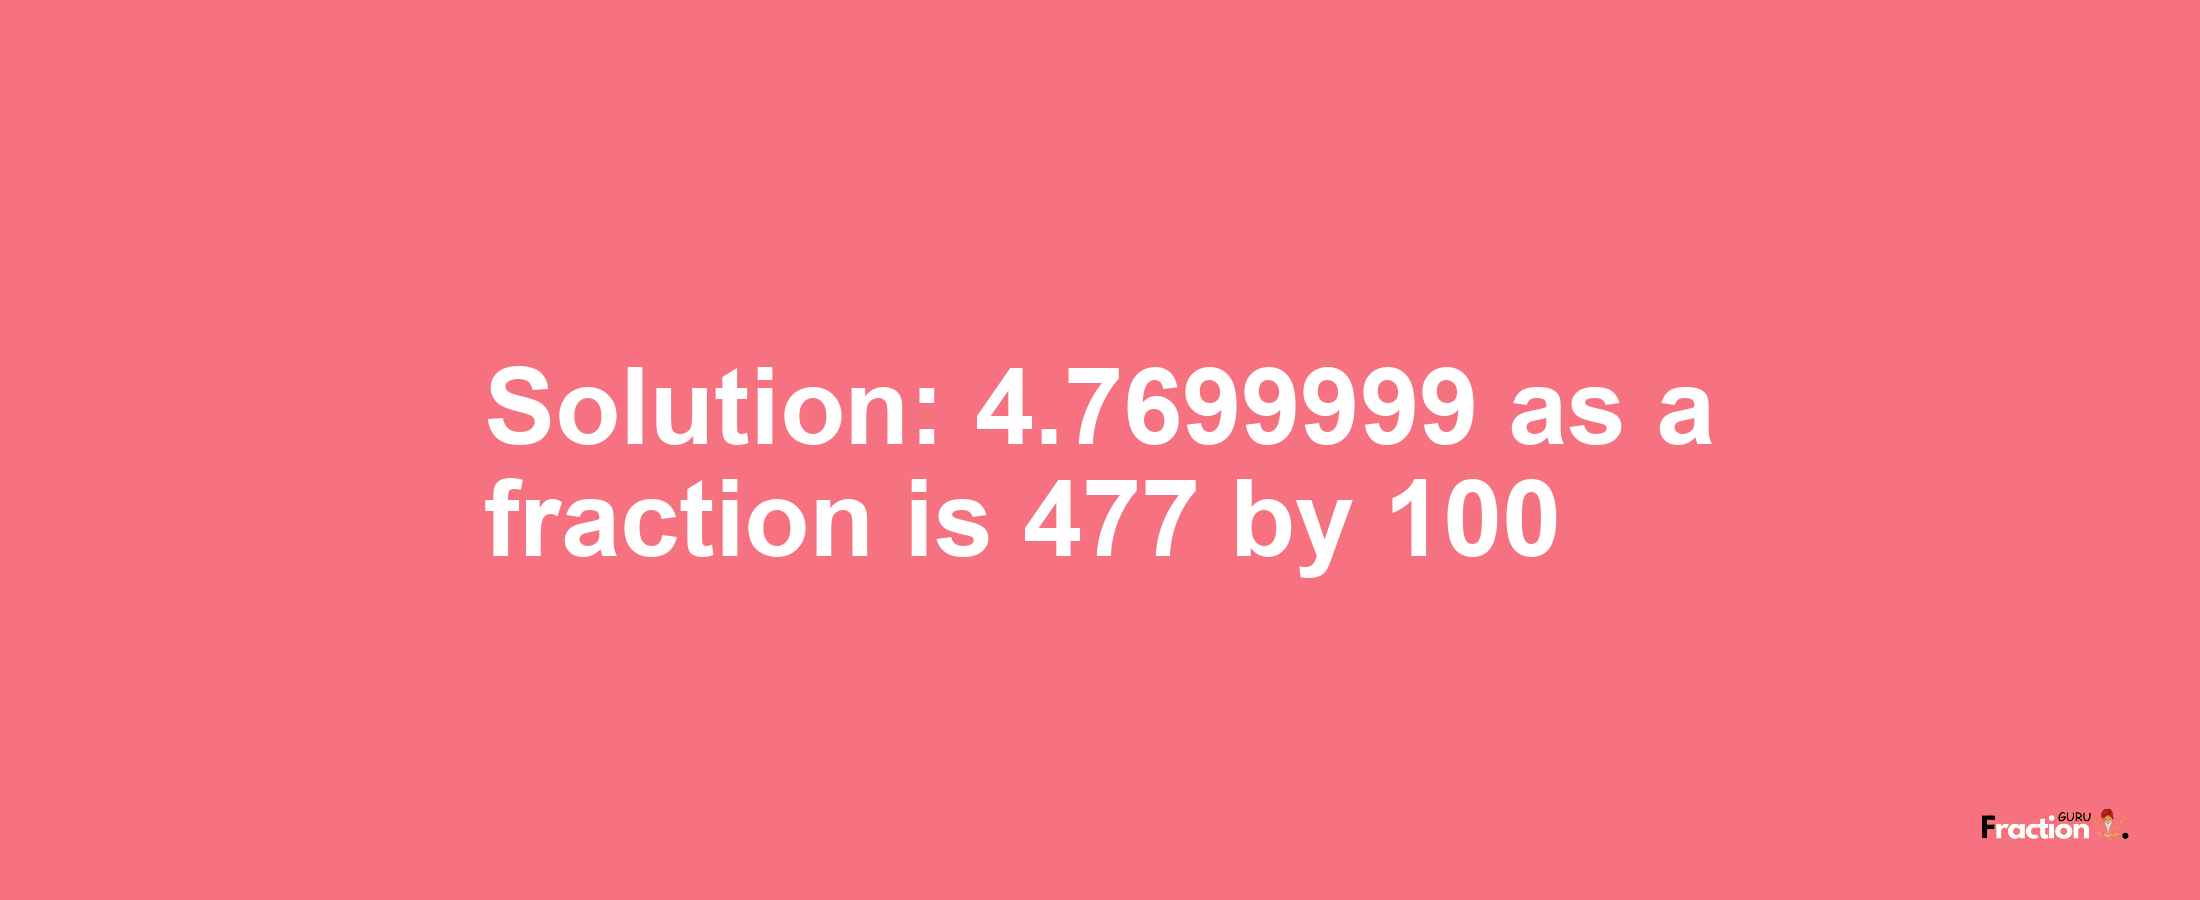 Solution:4.7699999 as a fraction is 477/100